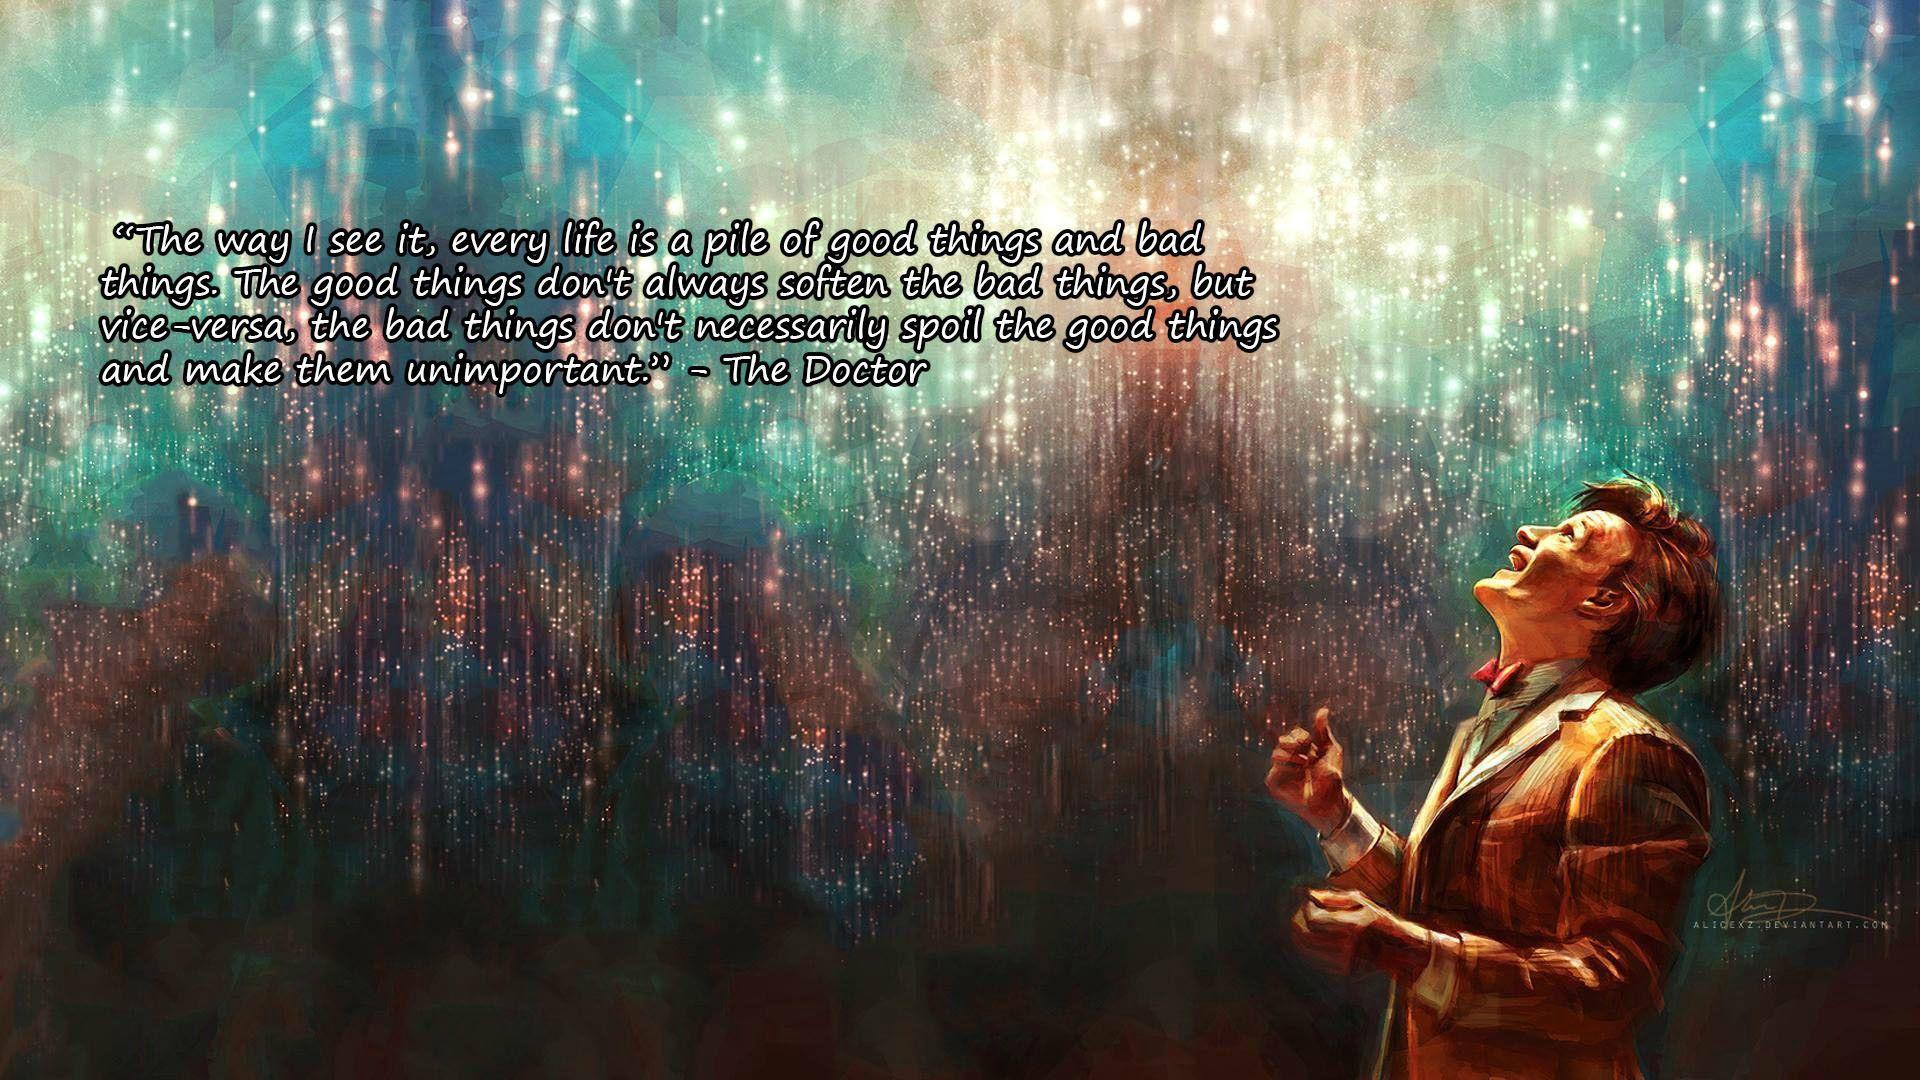 HD wallpaper Doctor Who Eleventh Doctor Matt Smith quote Typography   Wallpaper Flare